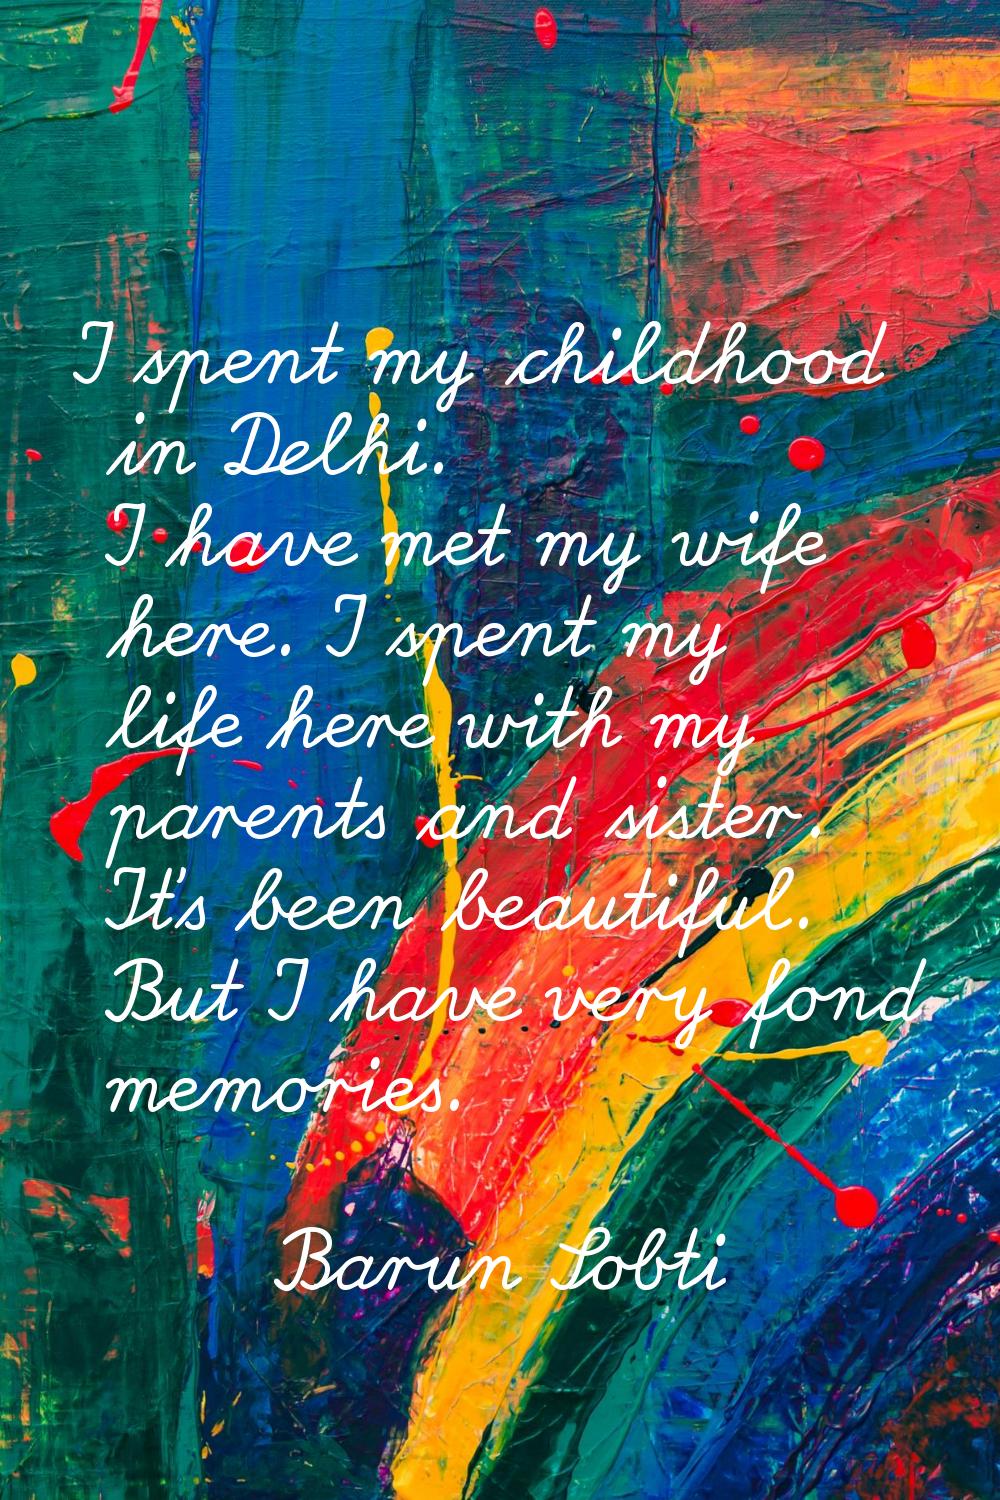 I spent my childhood in Delhi. I have met my wife here. I spent my life here with my parents and si